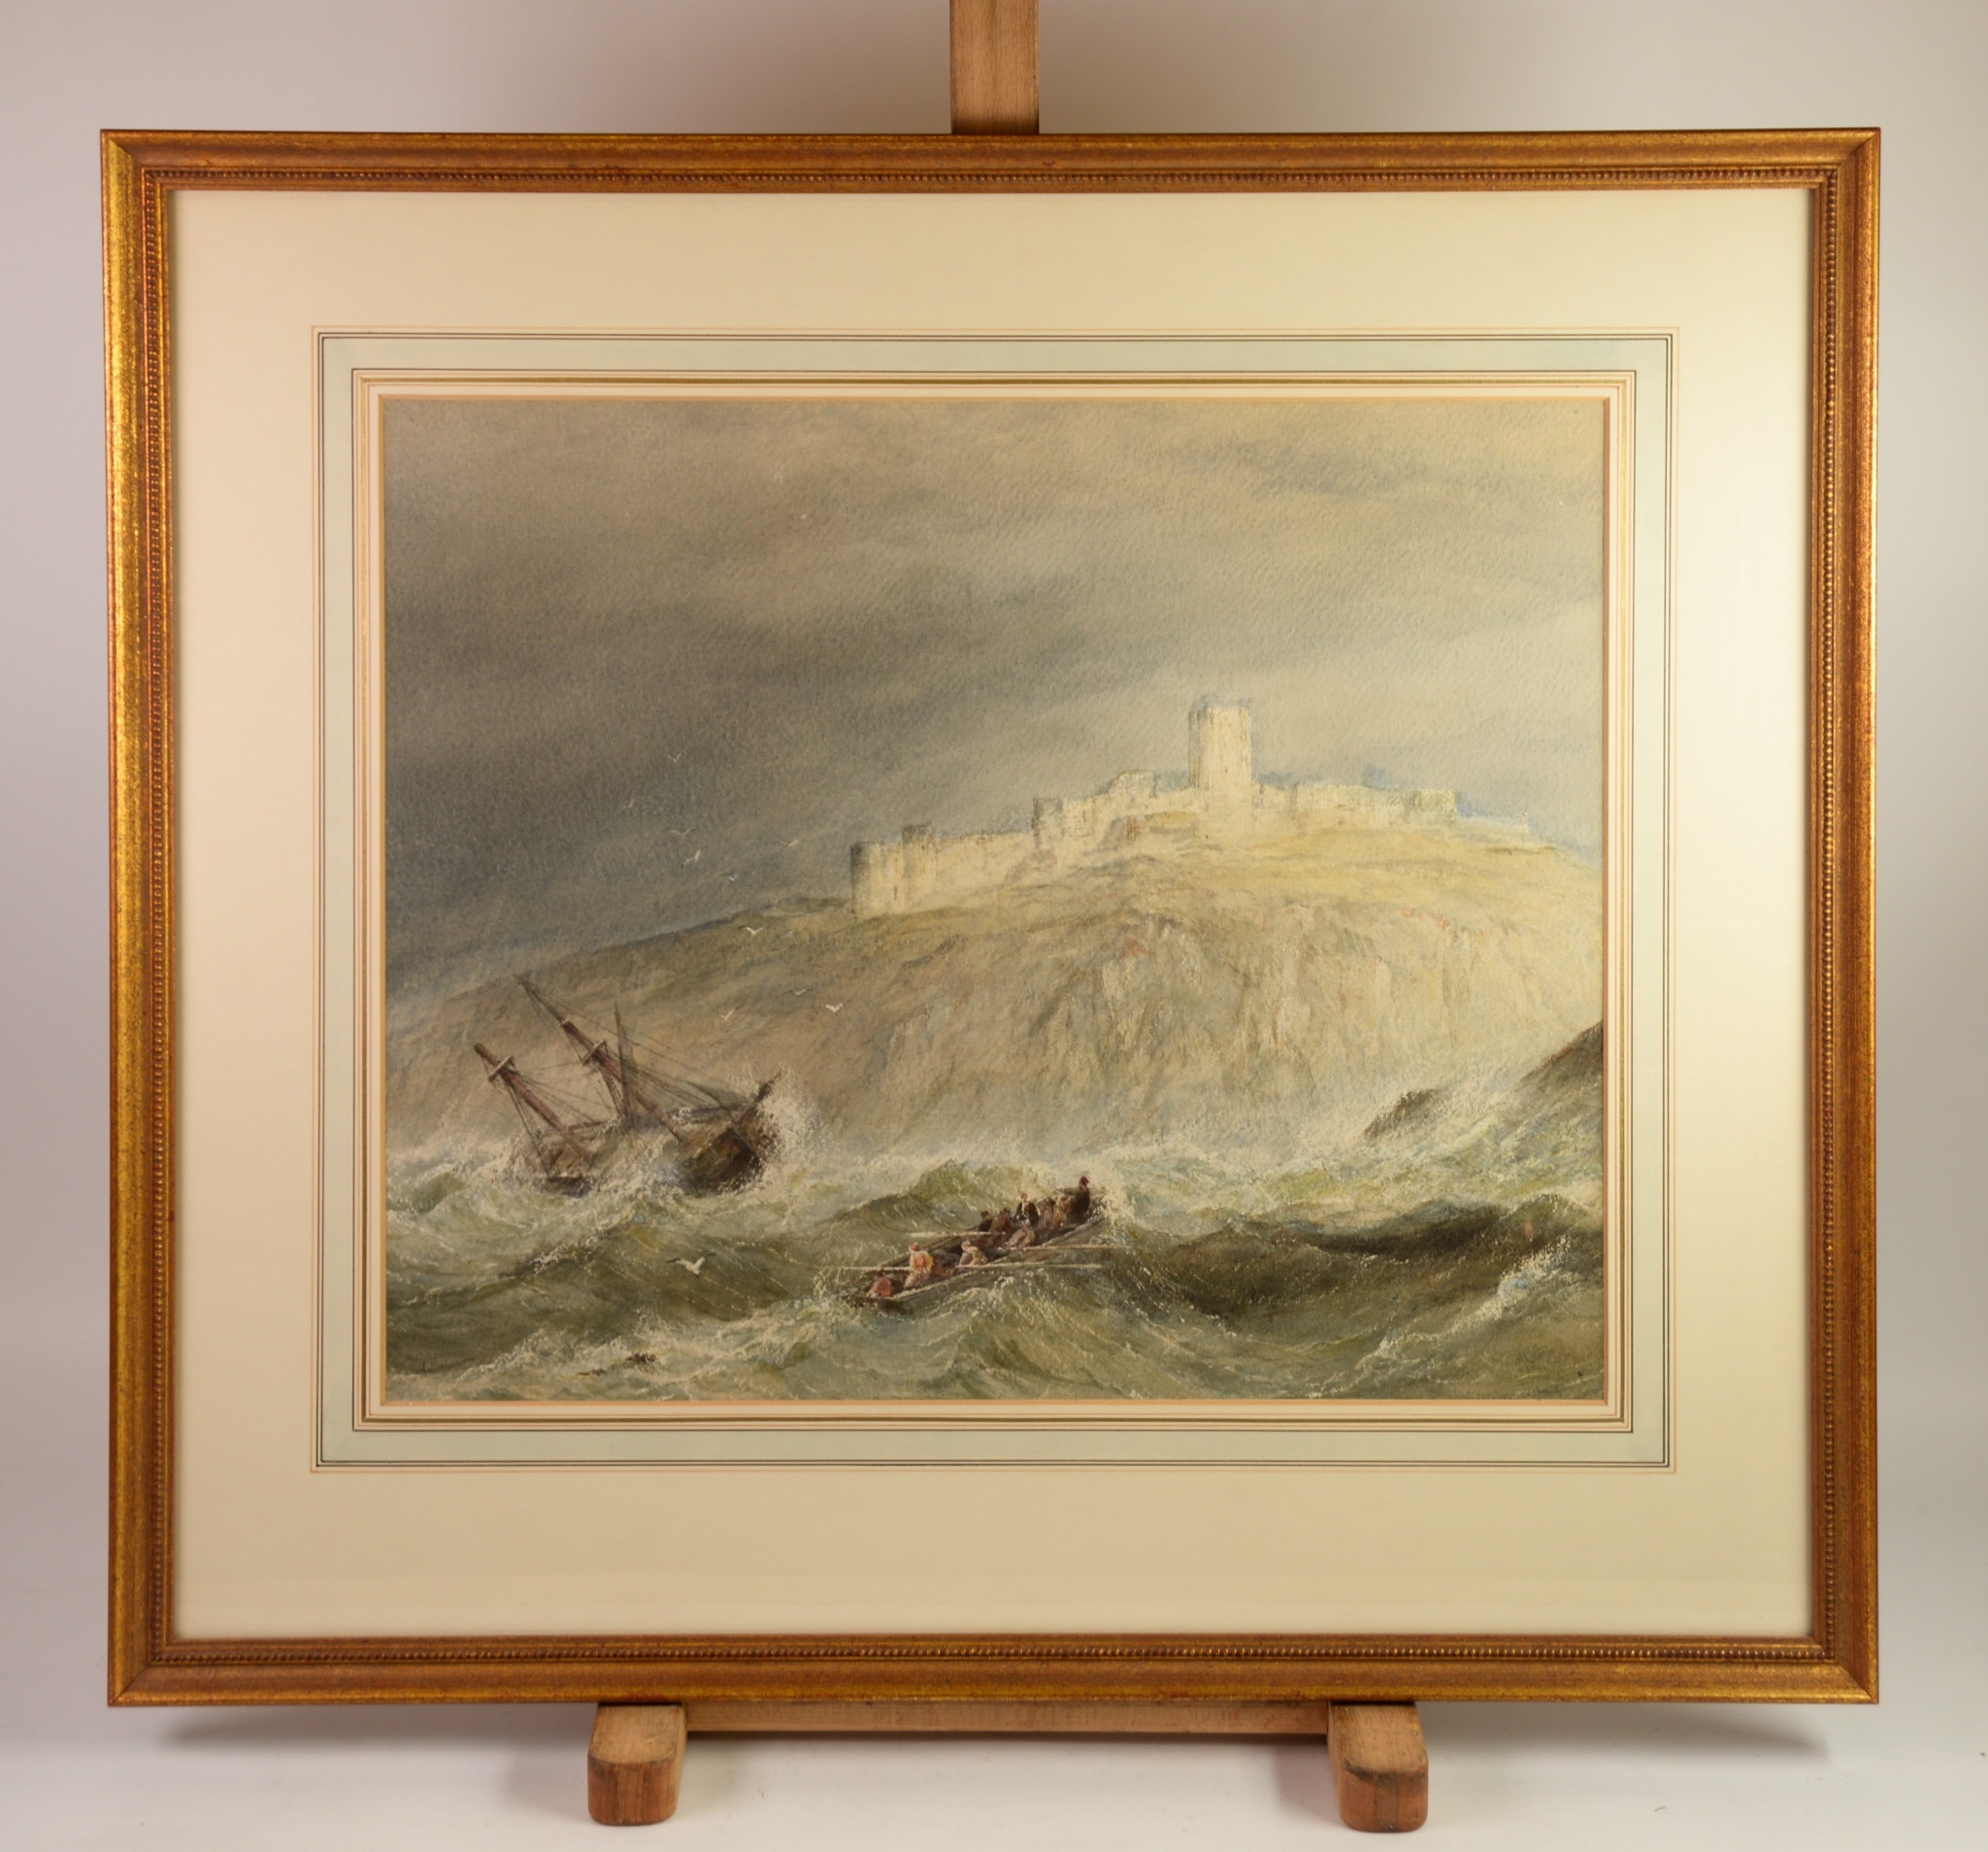 WILLIAM CLARKSON STANFIELD (1793 – 1867) WATERCOLOUR Ship wrecked on cliffs with lifeboat nearby, - Image 2 of 4